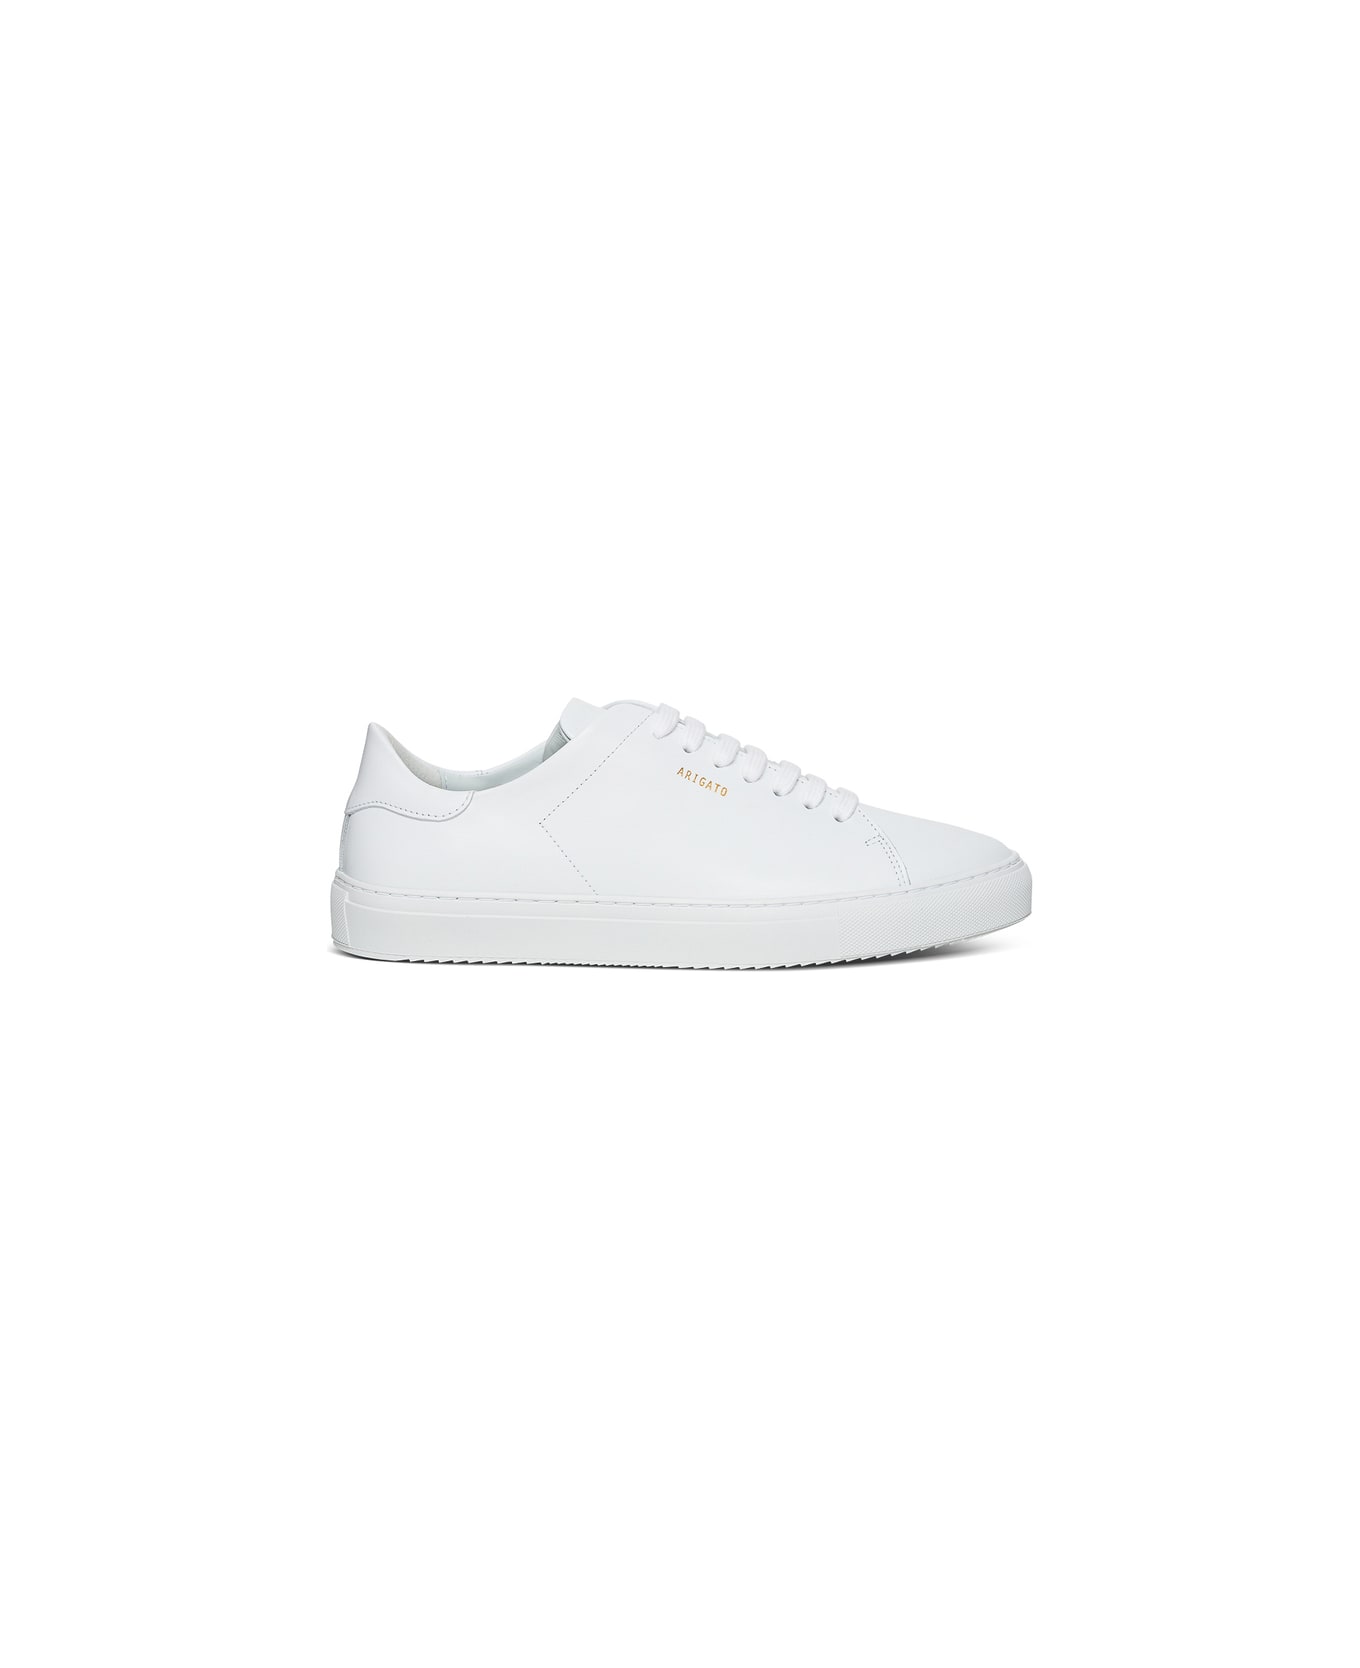 Axel Arigato 'clean 90' White Sneakers With Printed Logo In Leather Man Axel Arigato - White スニーカー